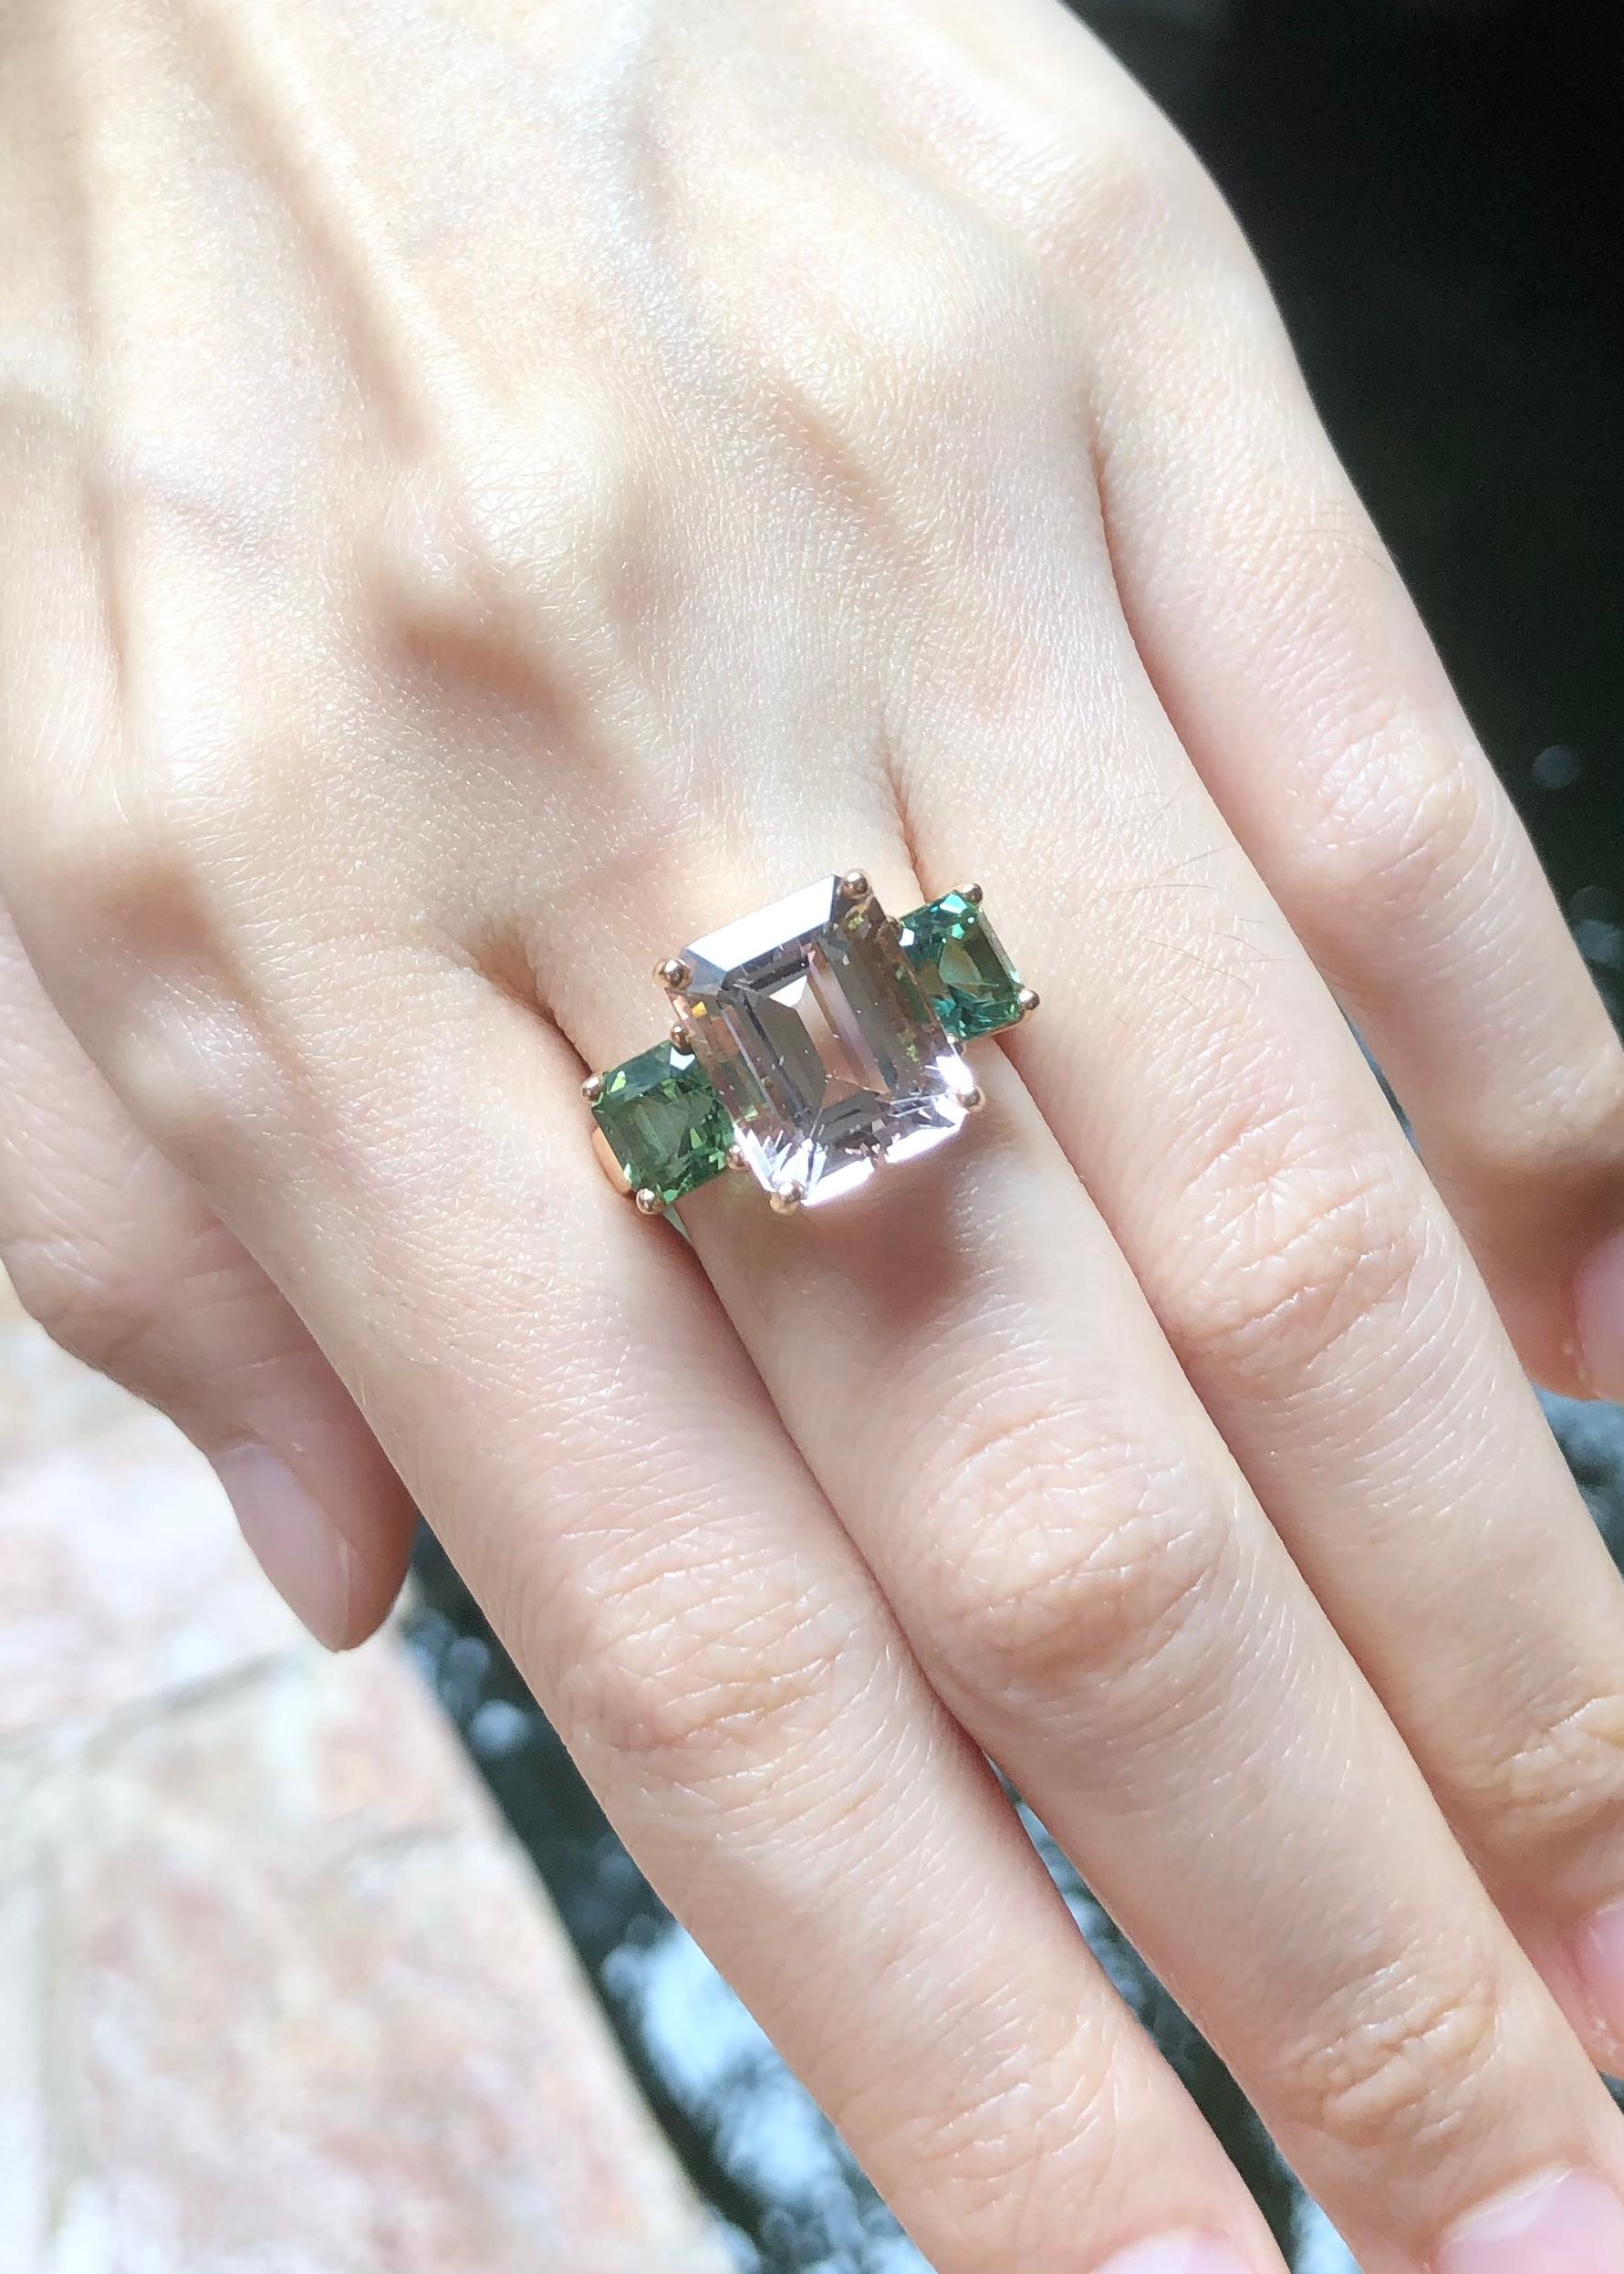 Morganite 5.89 carats with Green Tourmaline 2.74 carats Ring set in 18K Rose Gold Settings

Width:  1.8 cm 
Length: 1.1 cm
Ring Size: 53
Total Weight: 8.41 grams

